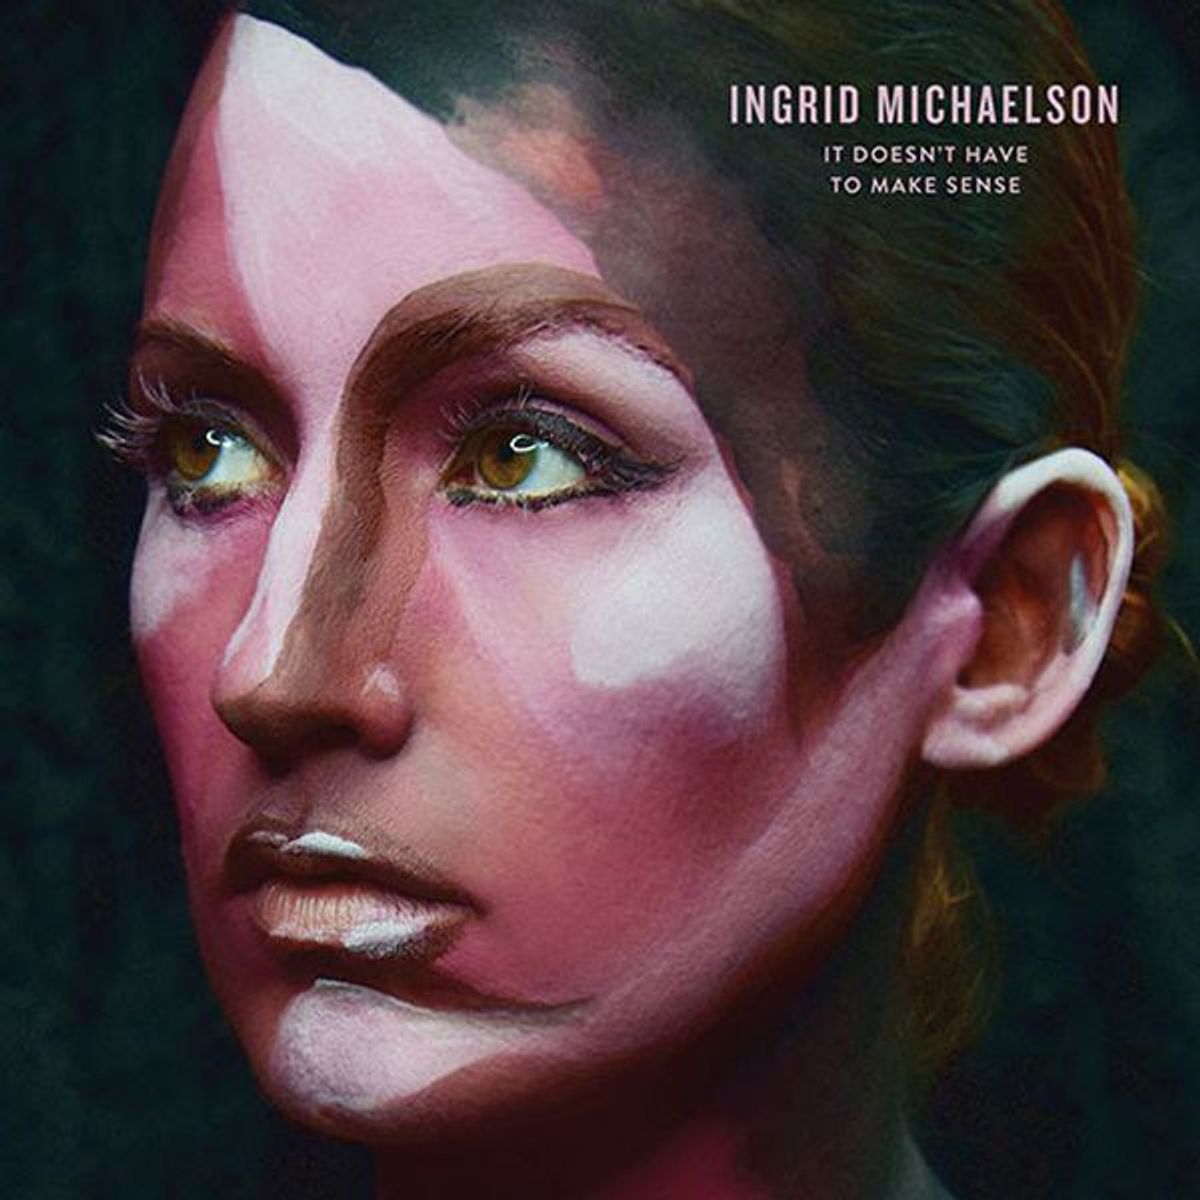 Ingrid Michaelson Album Review: It Doesn't Have To Make Sense